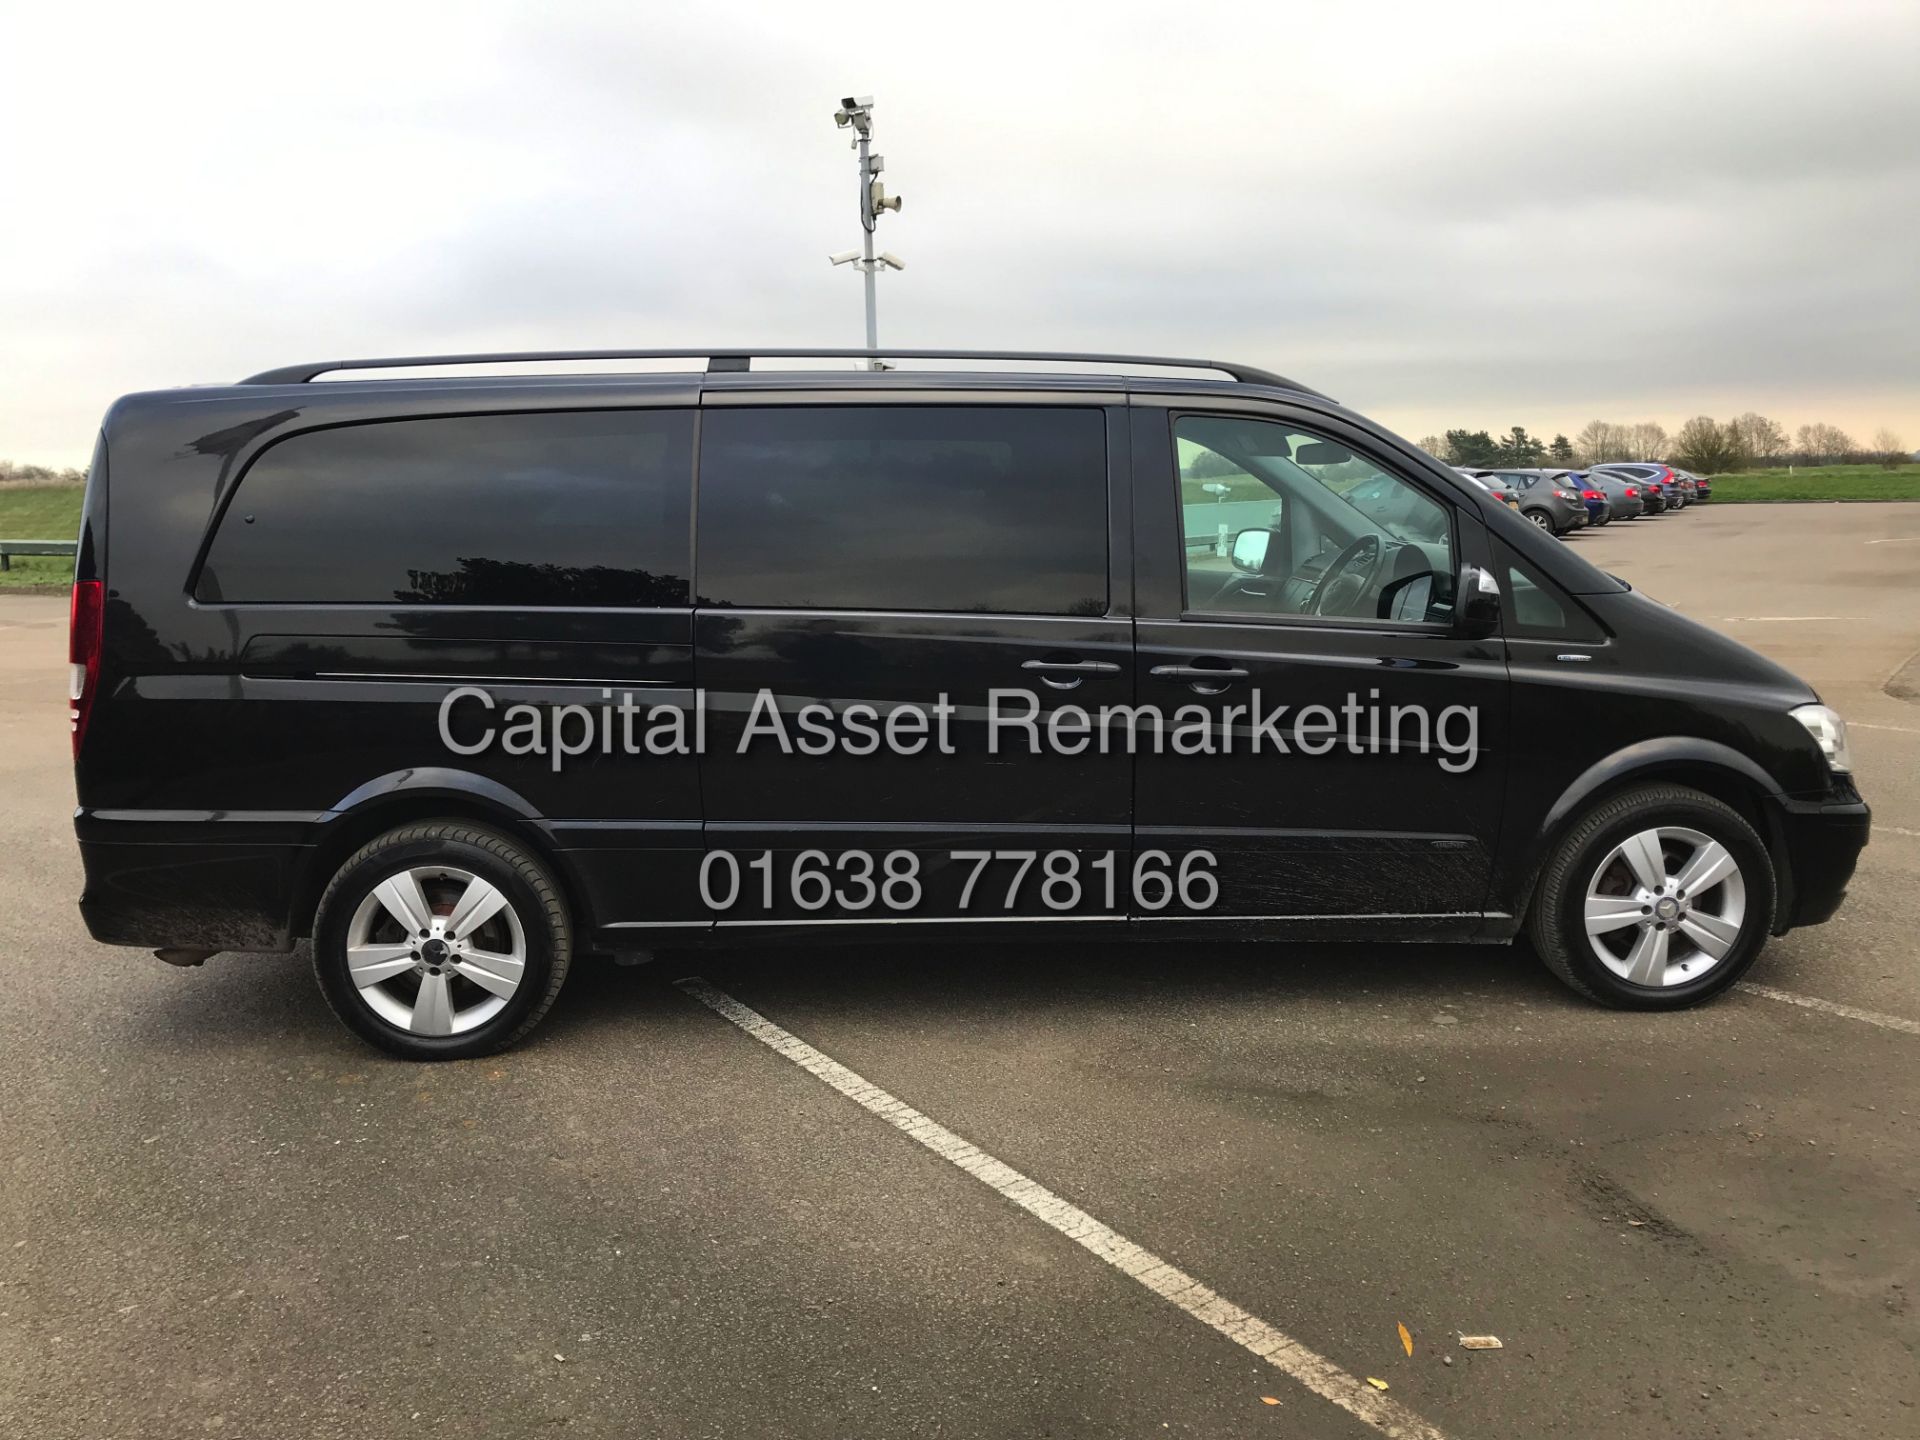 (ON SALE) MERCEDES VIANO 2.2CDI "AMBIENET" XLWB 8 SEATER (14 REG) 1 OWNER - FULLY LOADED - LEATHER - Image 6 of 28